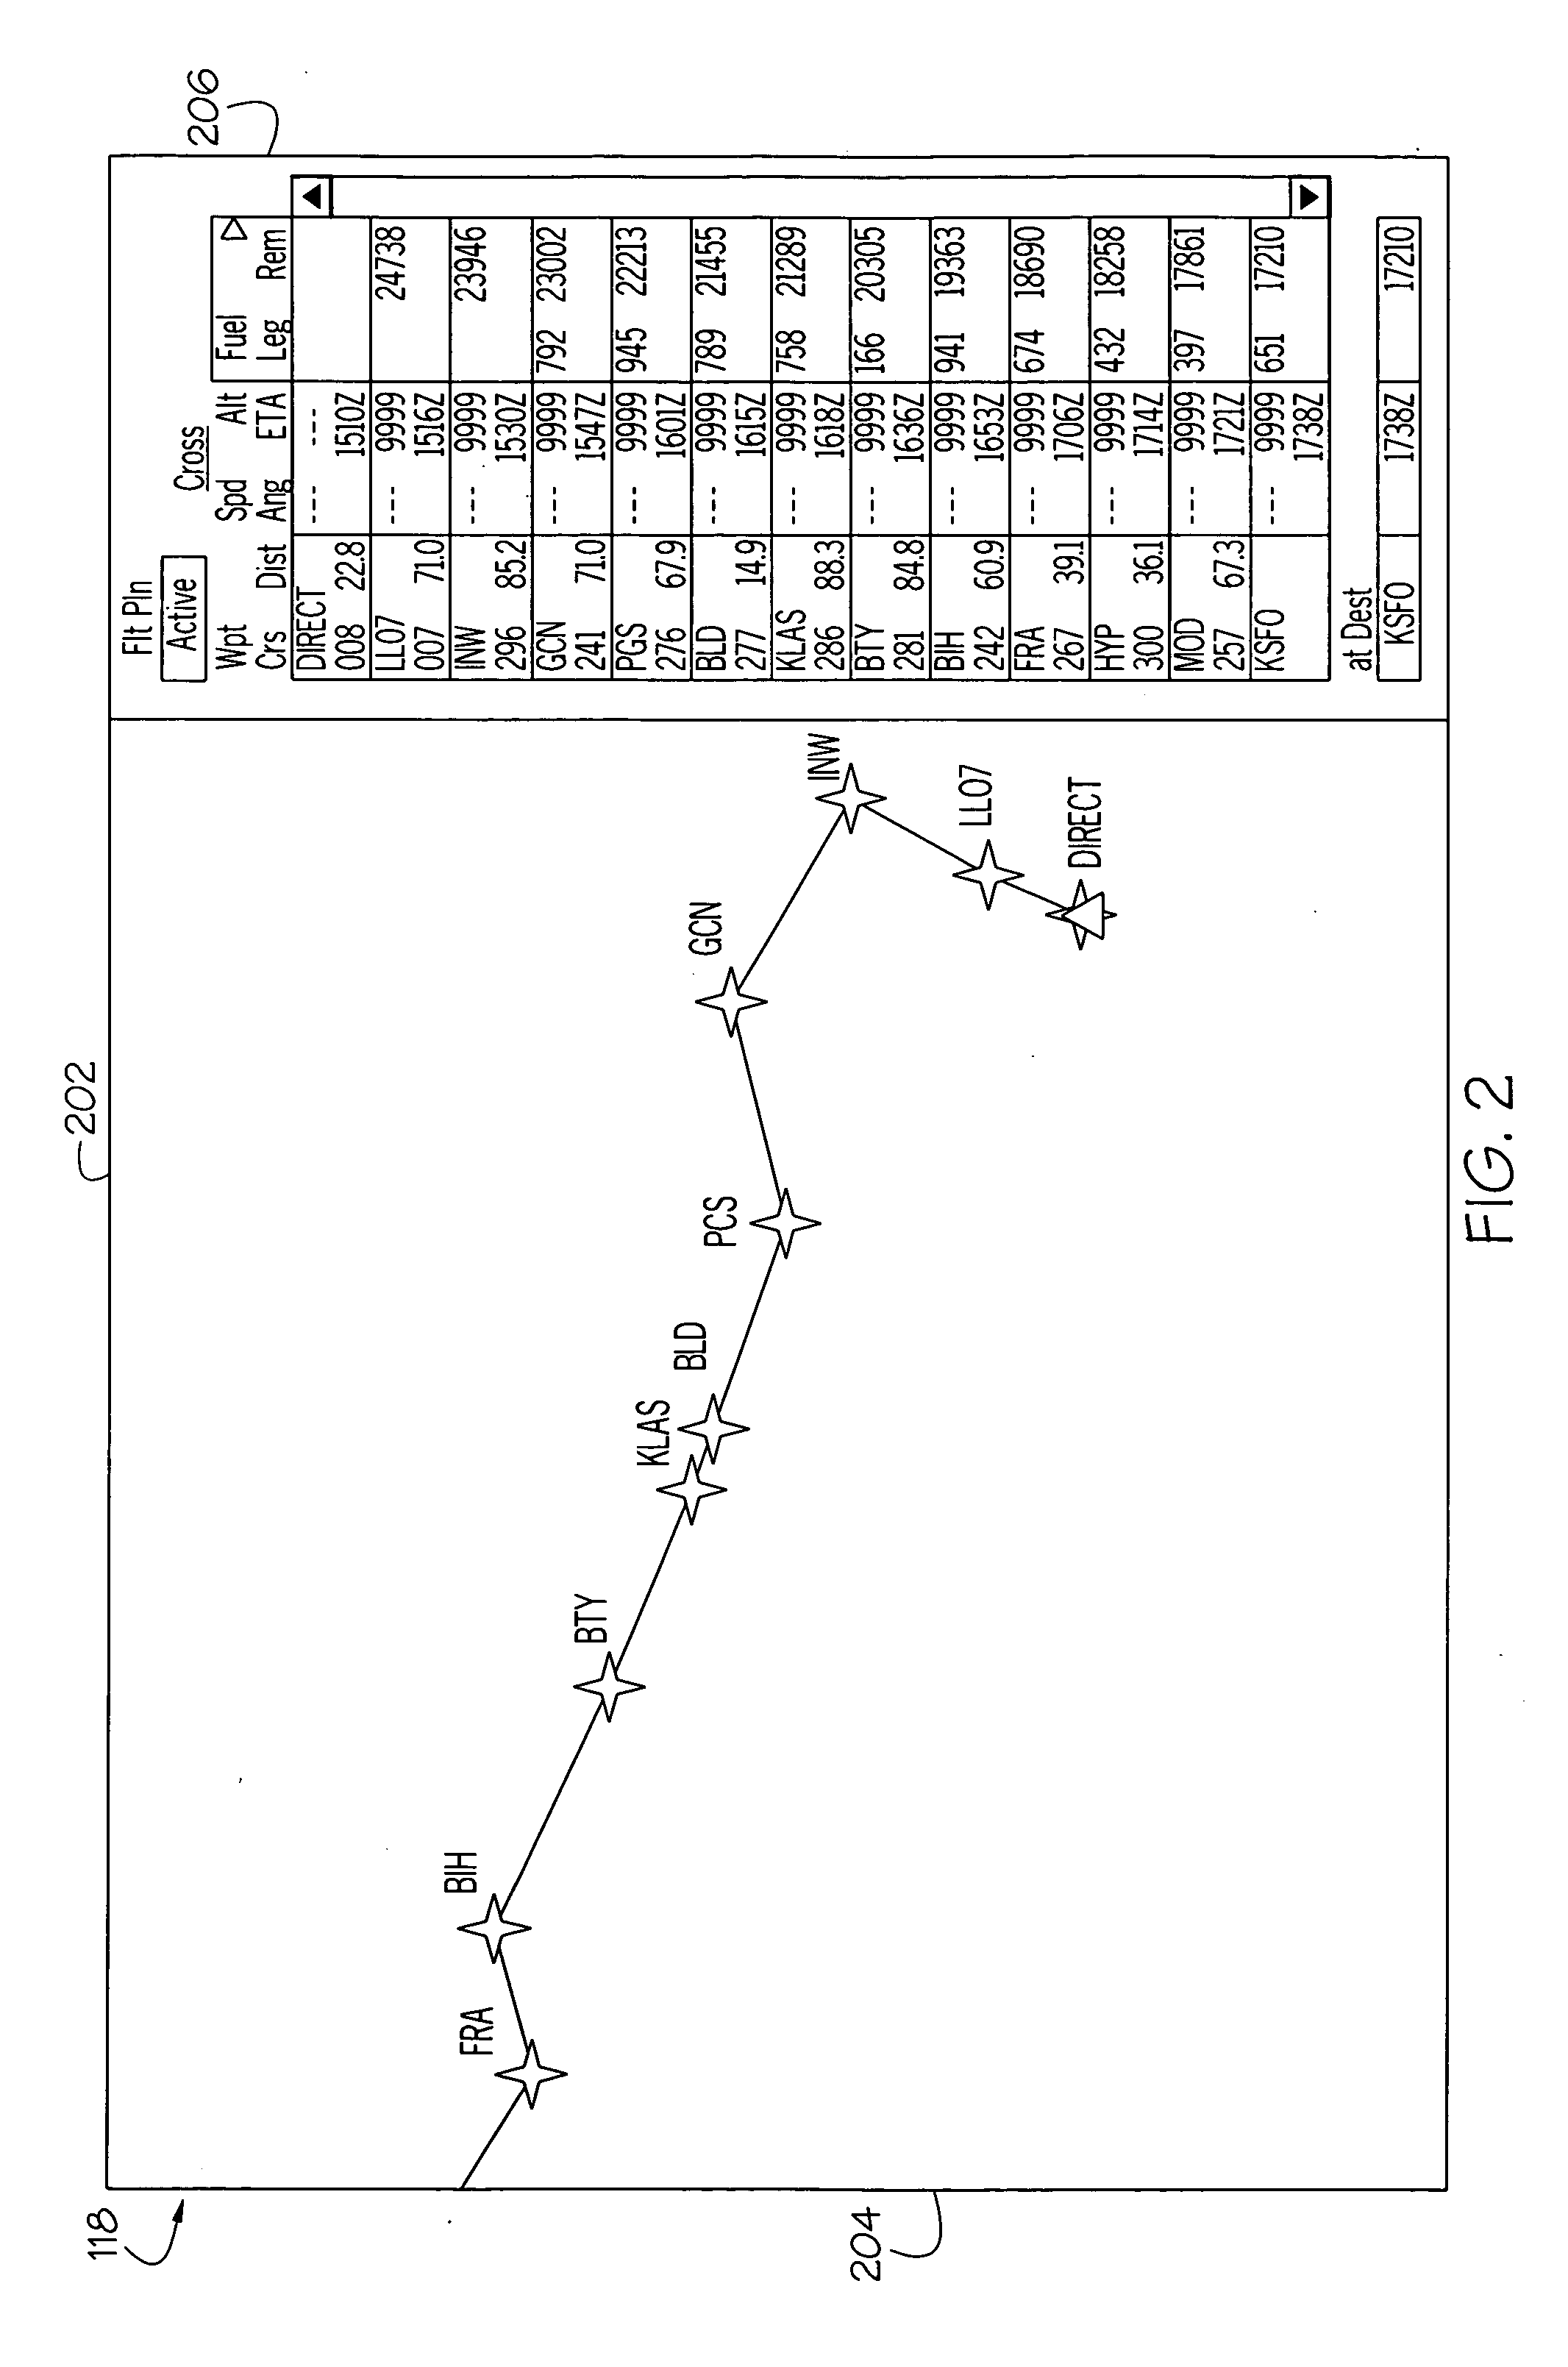 Methods and apparatus for overlaying non-georeferenced symbology on a georeferenced chart